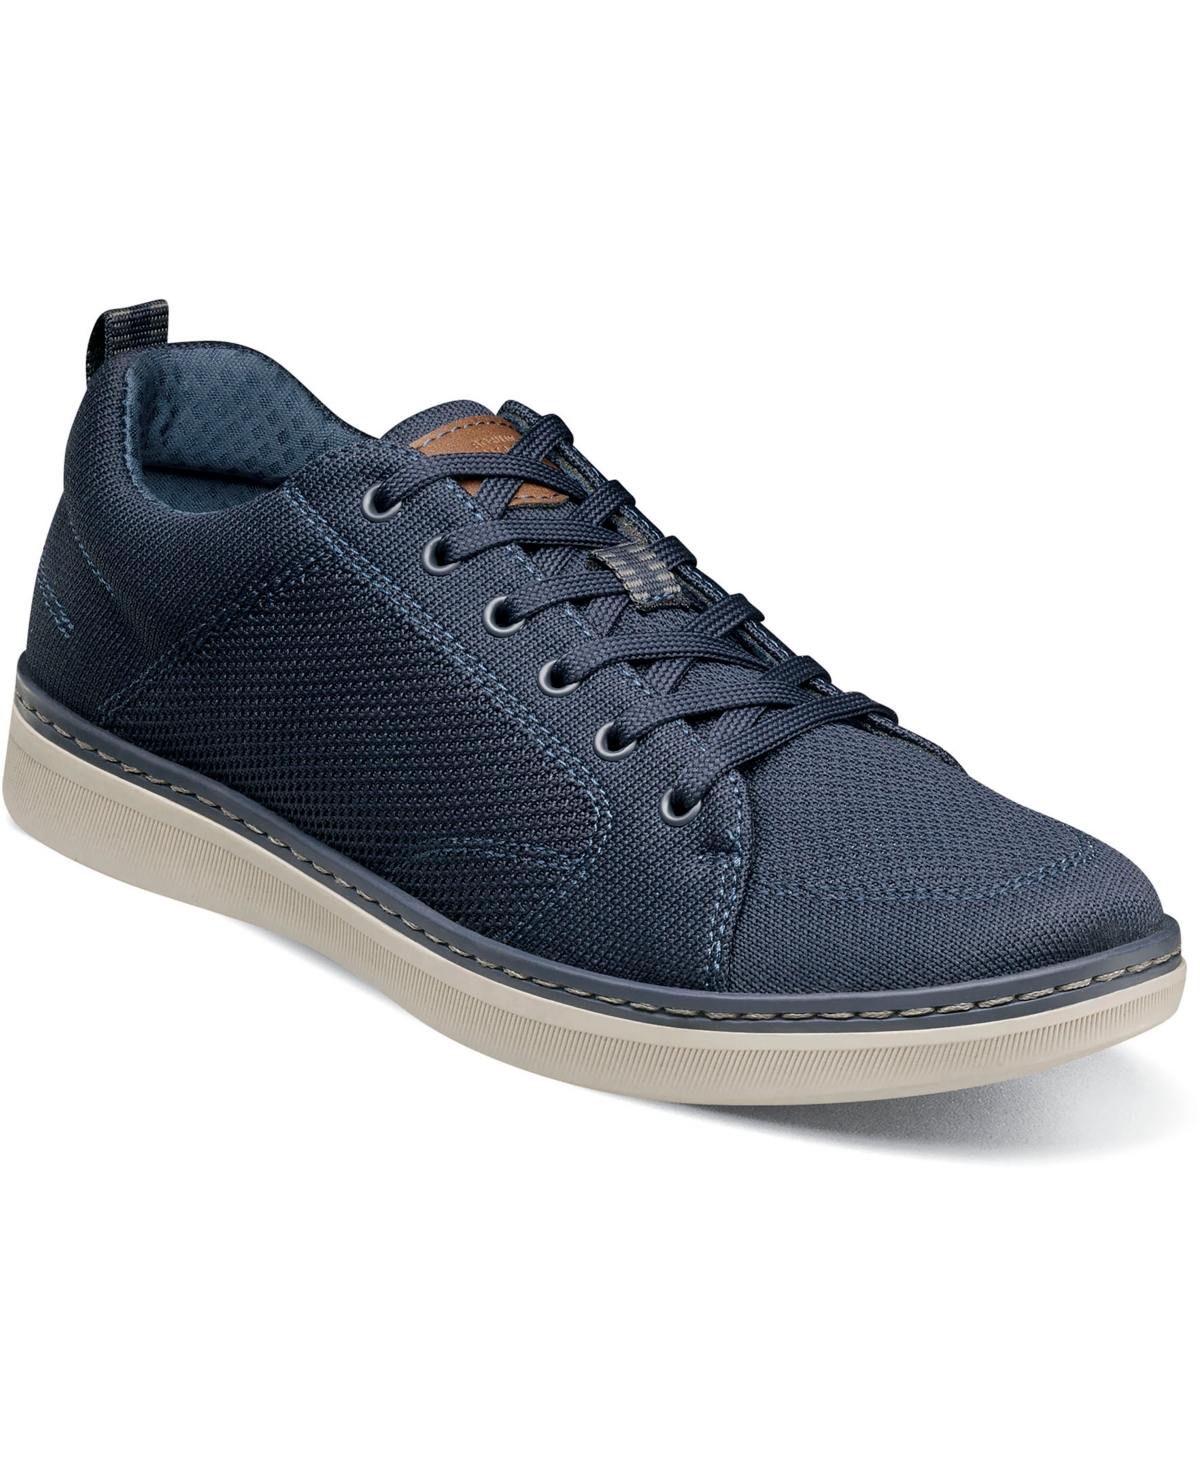 Men's Aspire Knit Lace To Toe Oxford Shoes - Navy